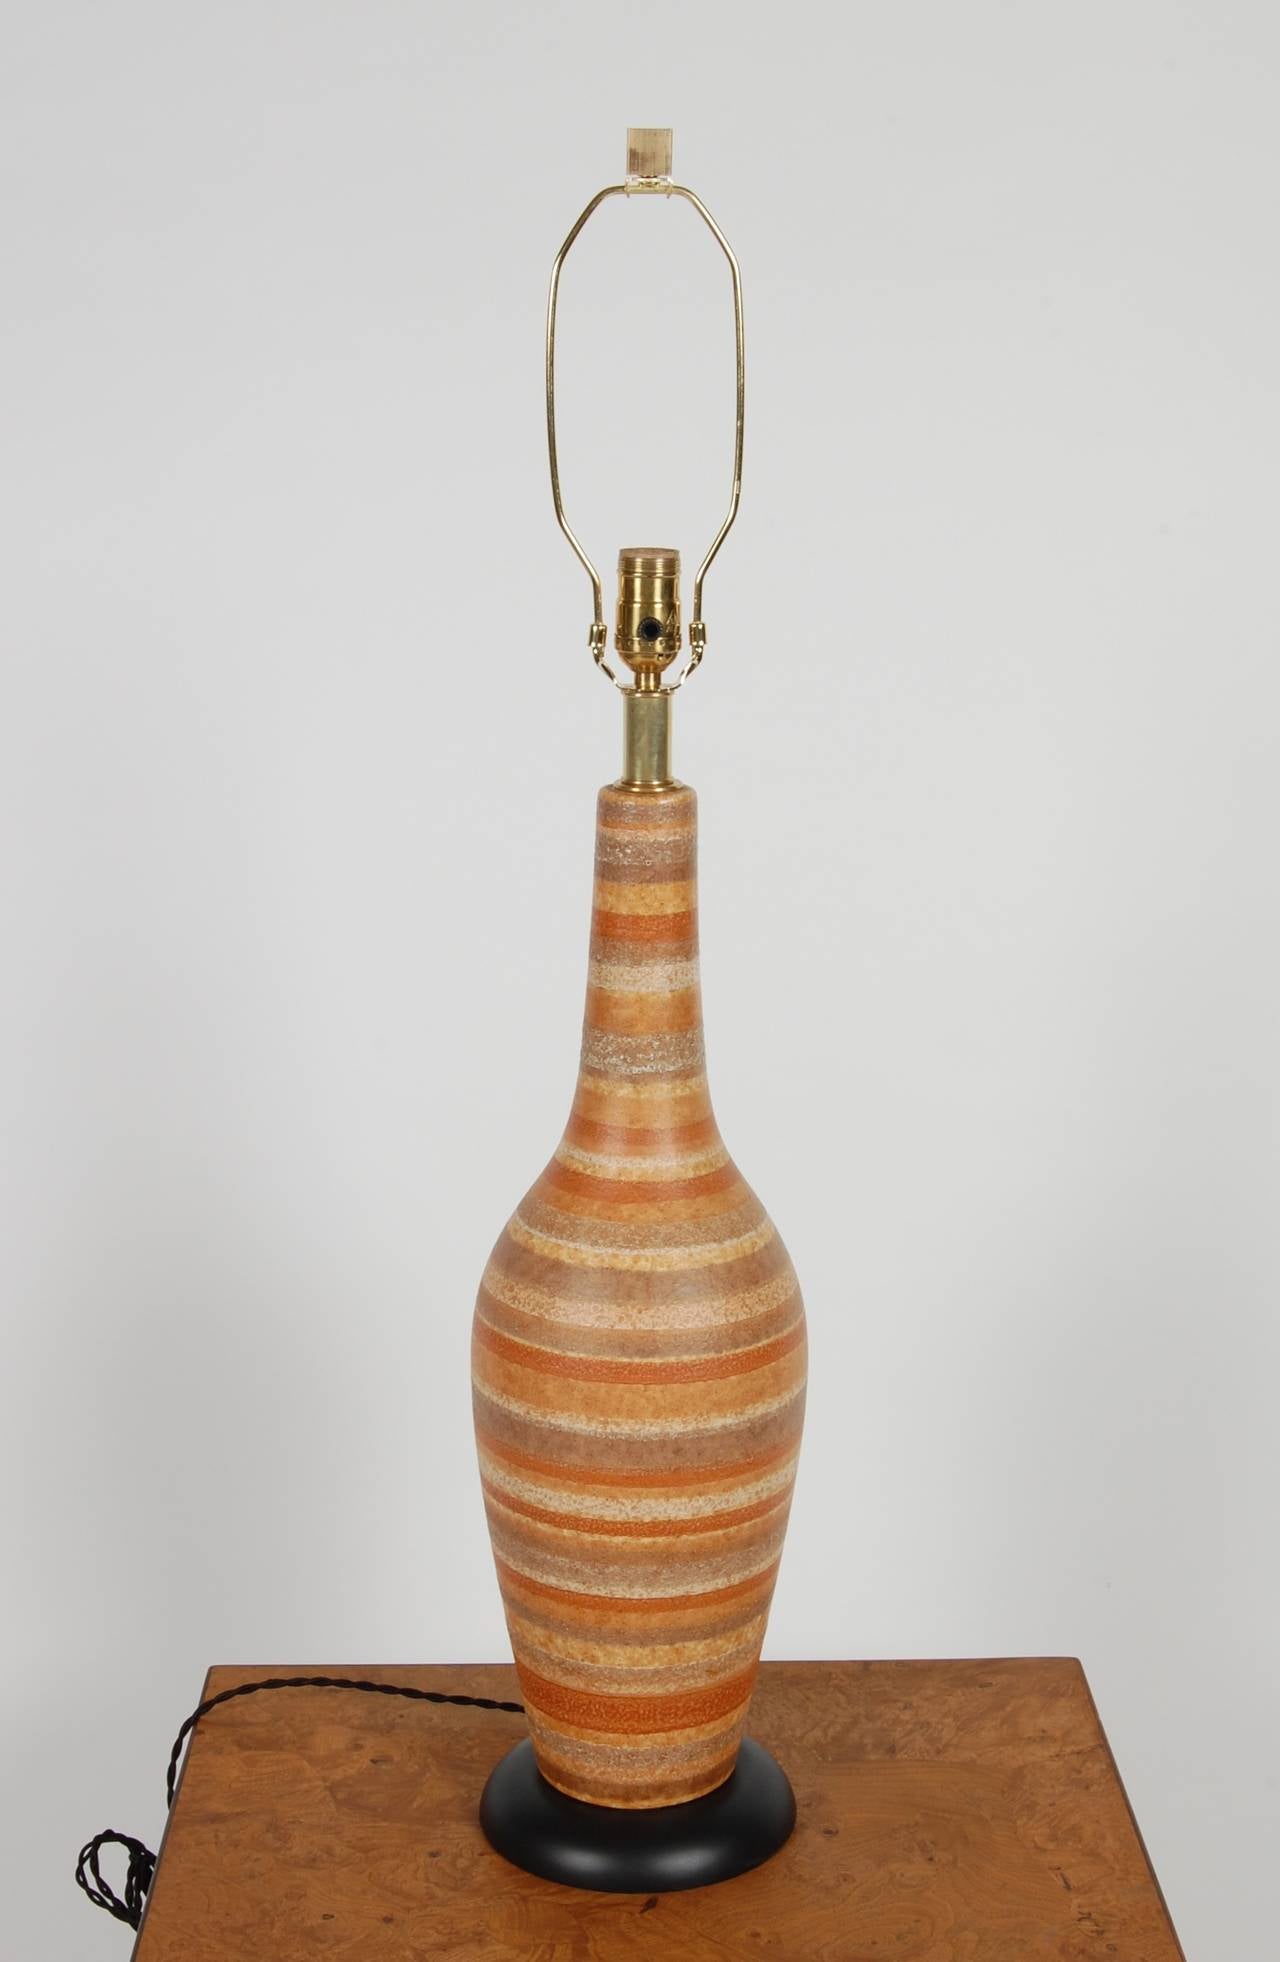 Striped ceramic lamp in various earth tone hues with a light volcanic glaze, black lacquer wood base all new electrical.